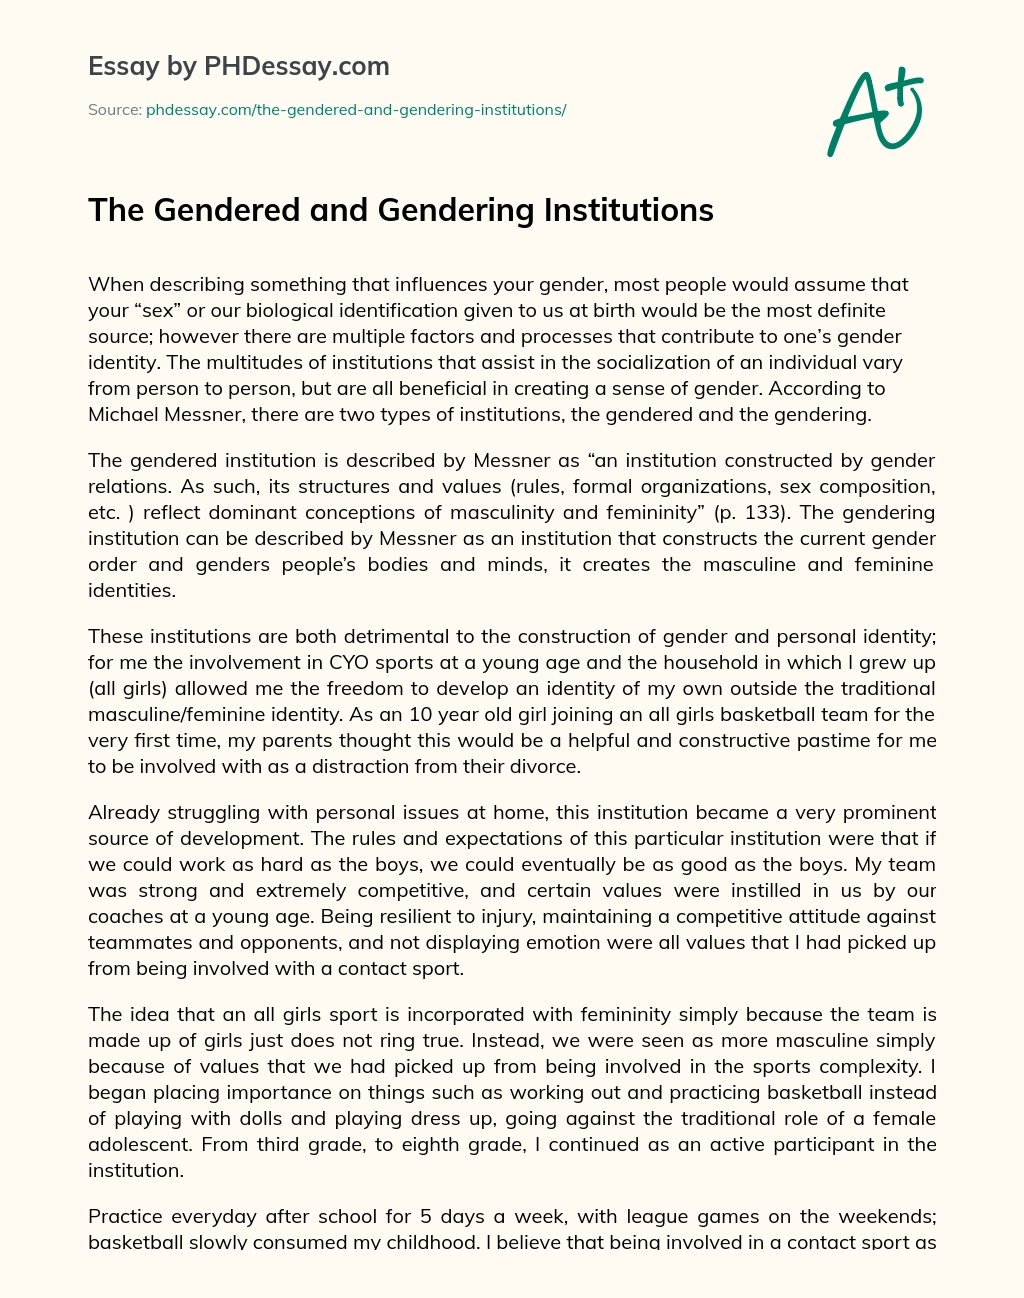 The Gendered and Gendering Institutions essay